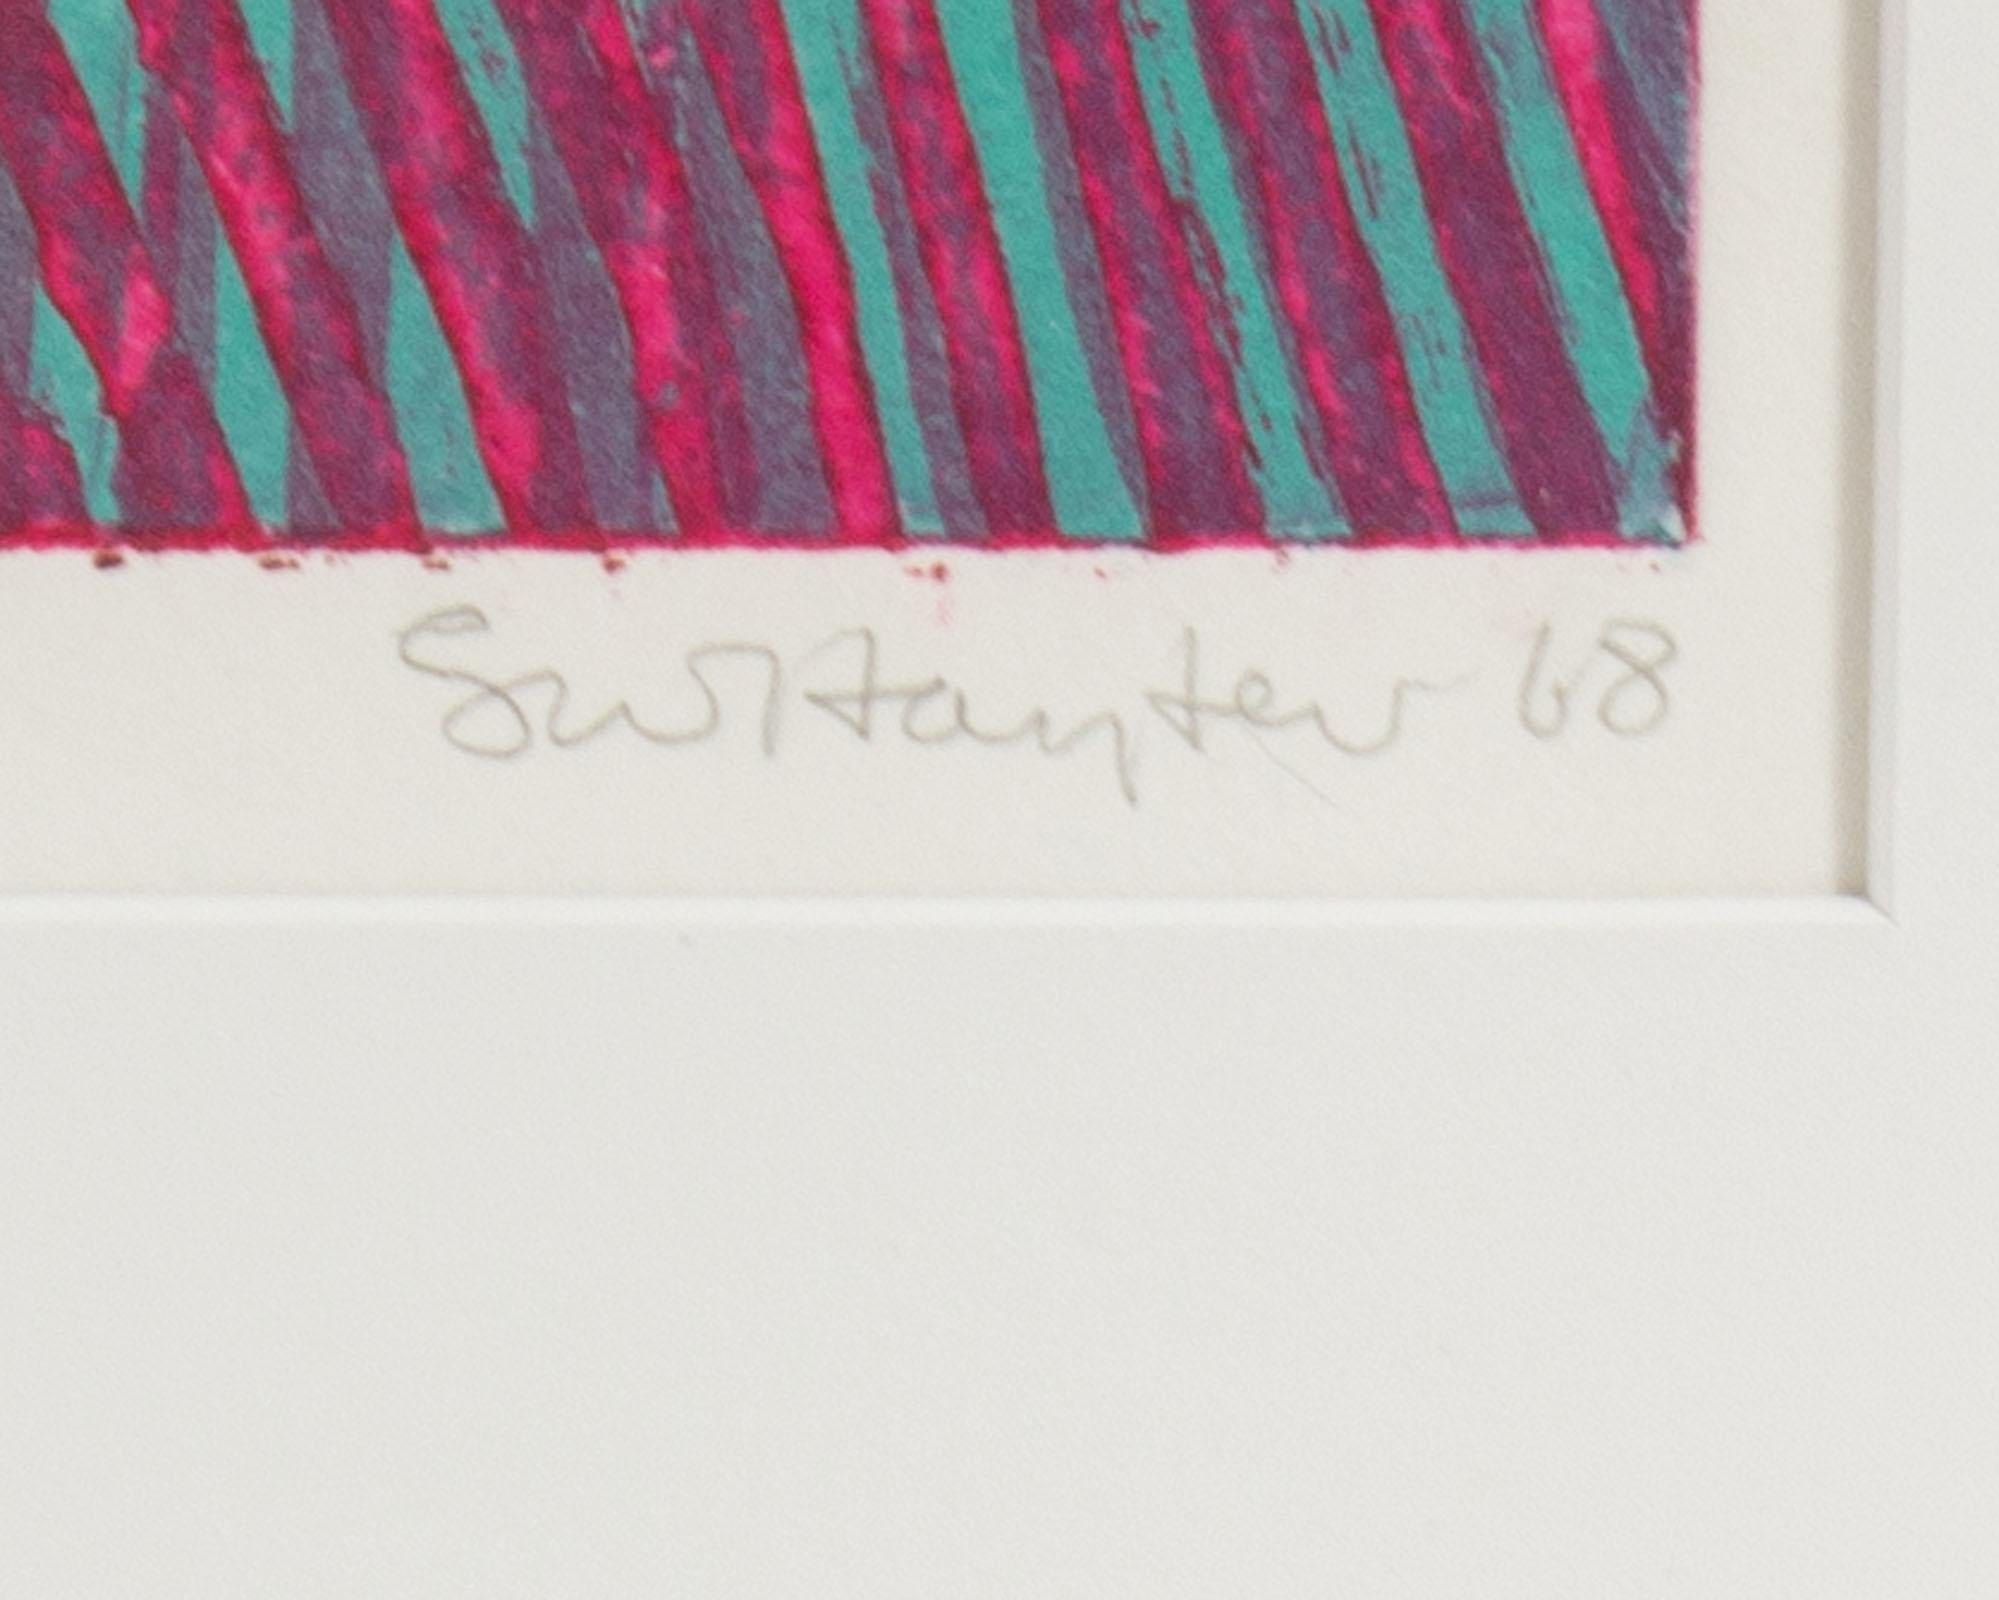 Paper Stanley William Hayter Signed 1968 “Vortex” Abstract Color Etching  For Sale